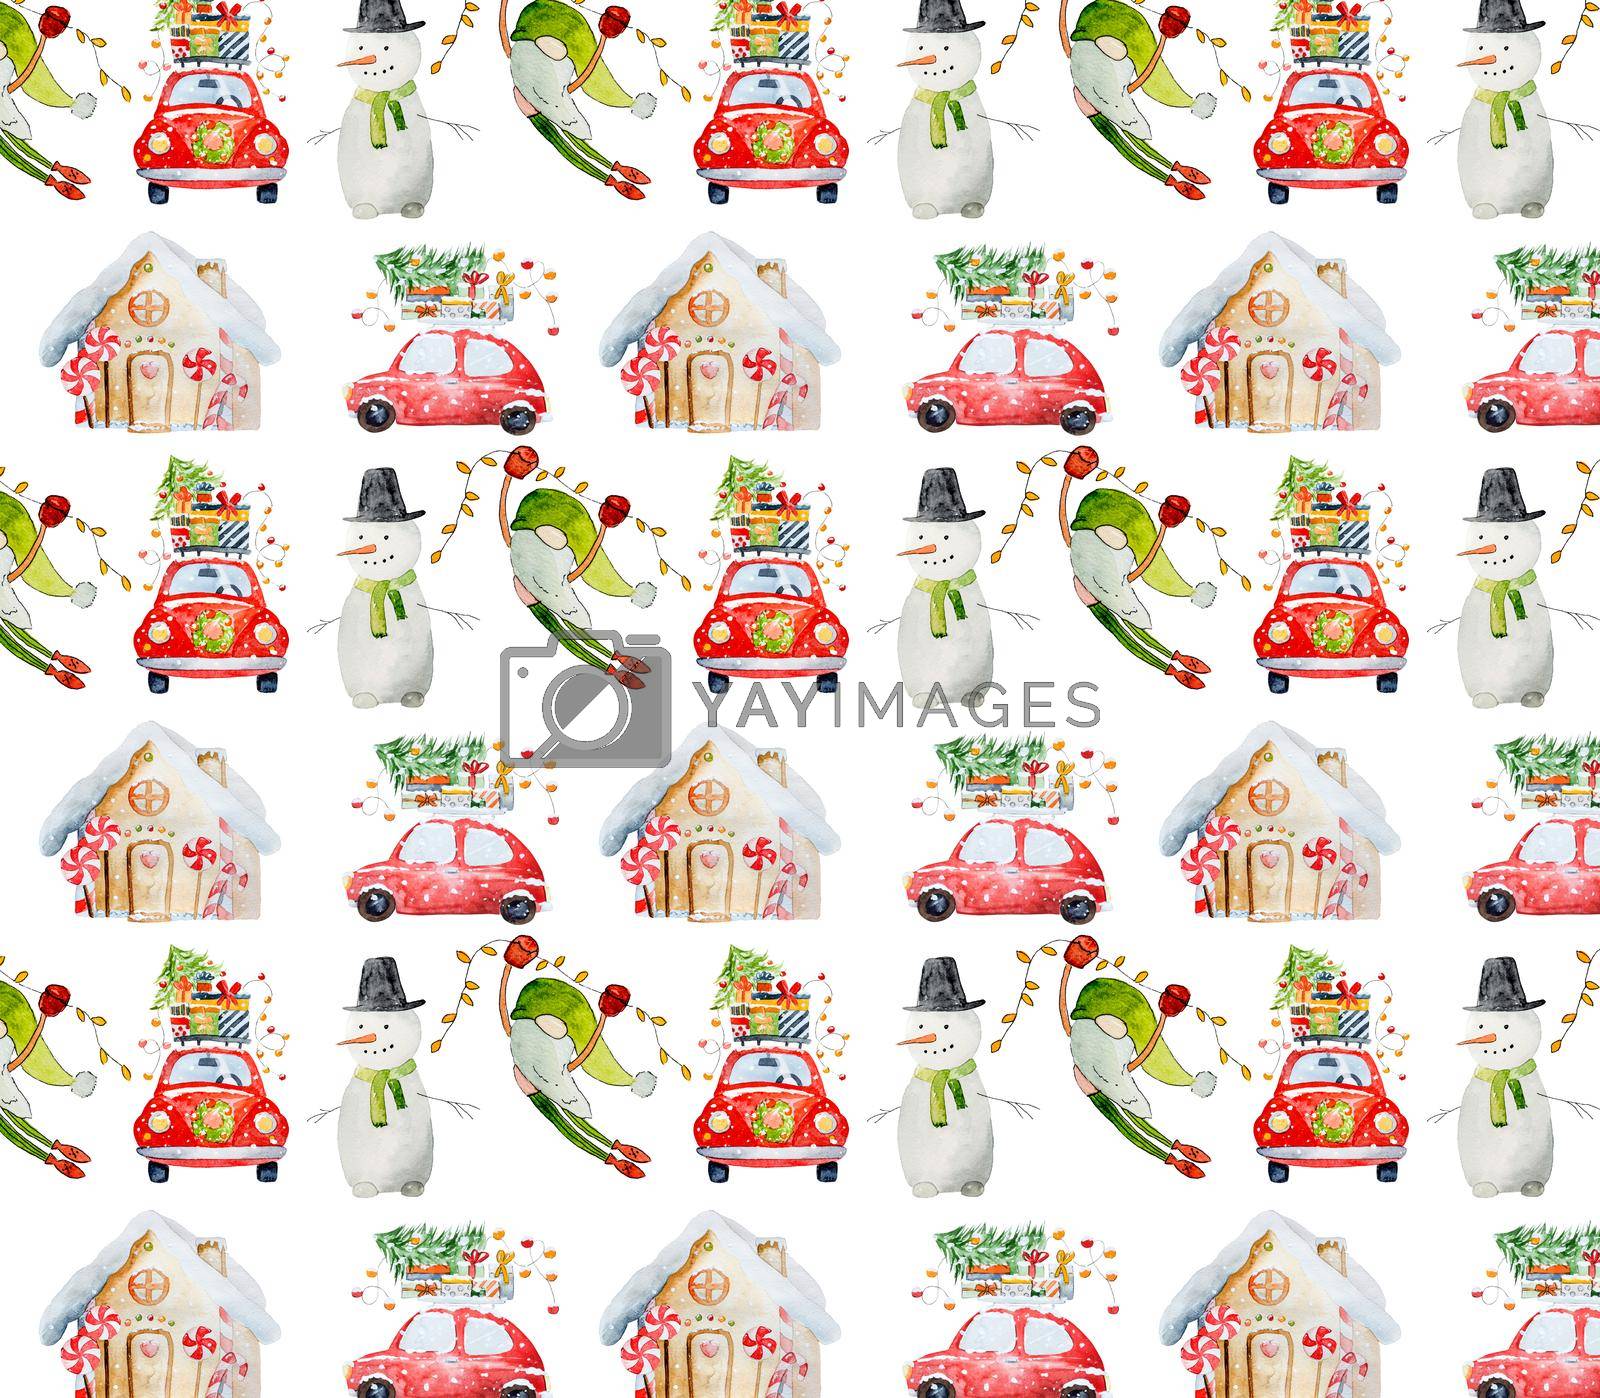 Royalty free image of Christmas illustrations seamless pattern by tan4ikk1